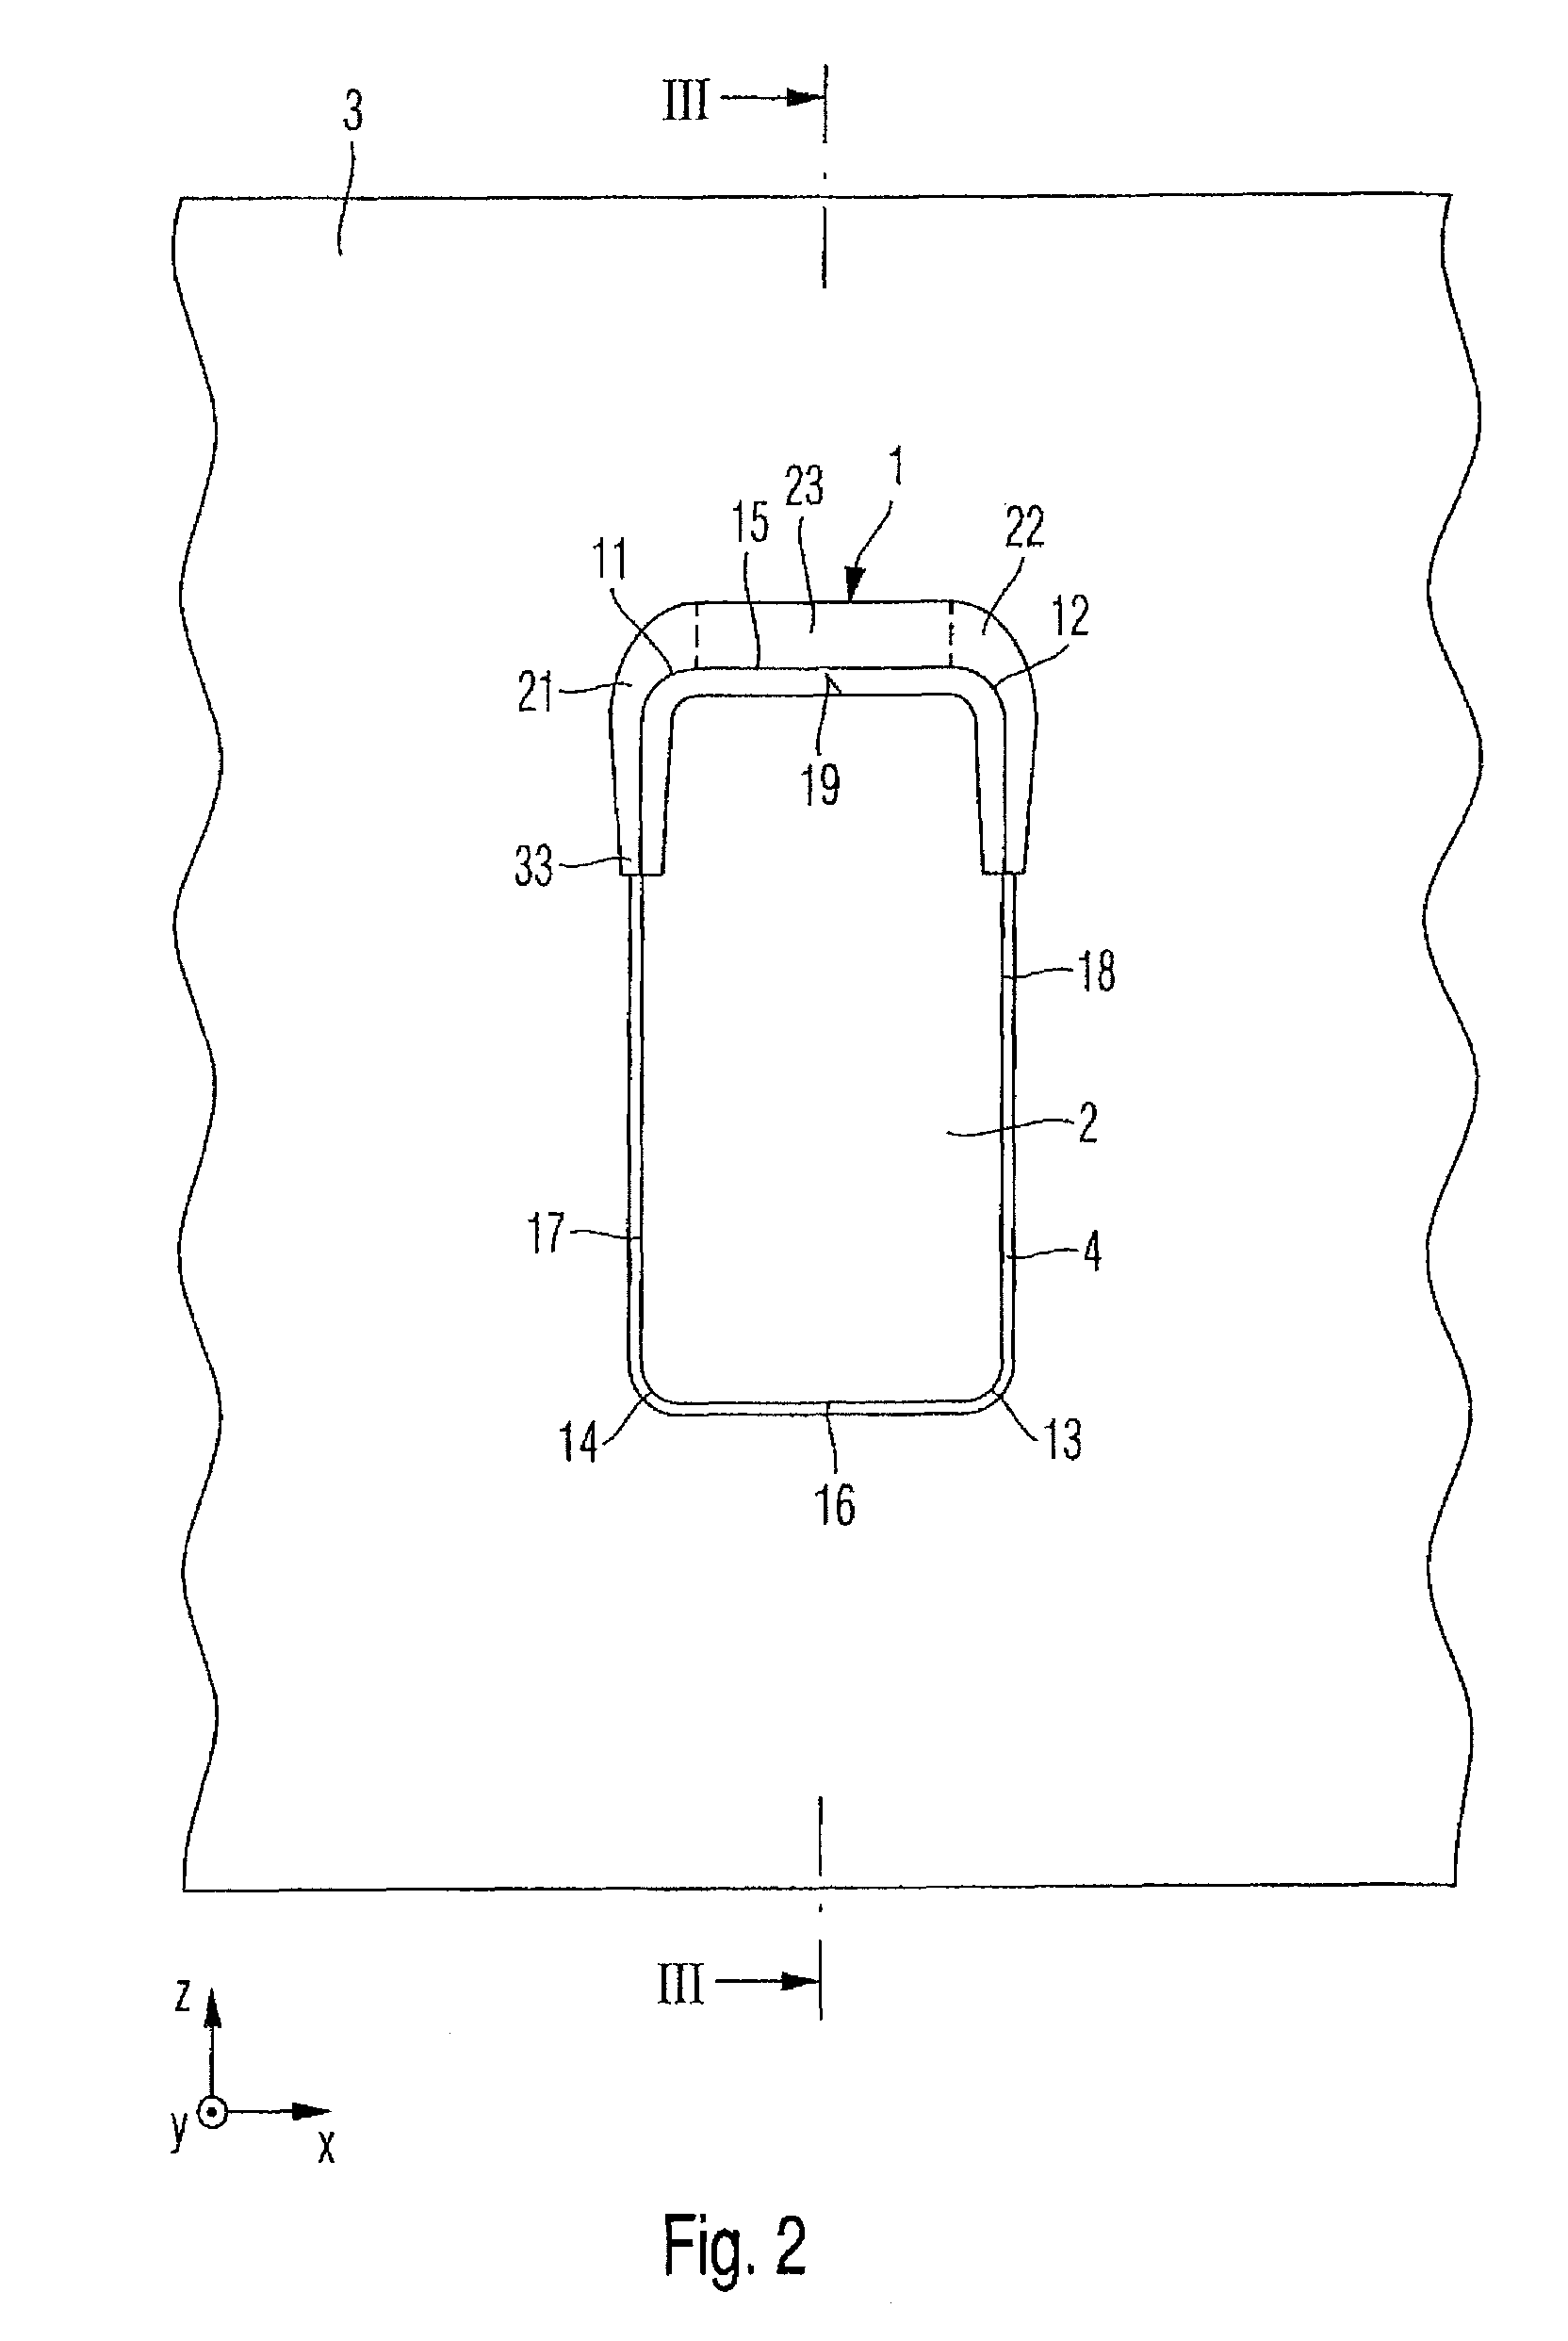 Cover plate, door covering and aircraft or spacecraft